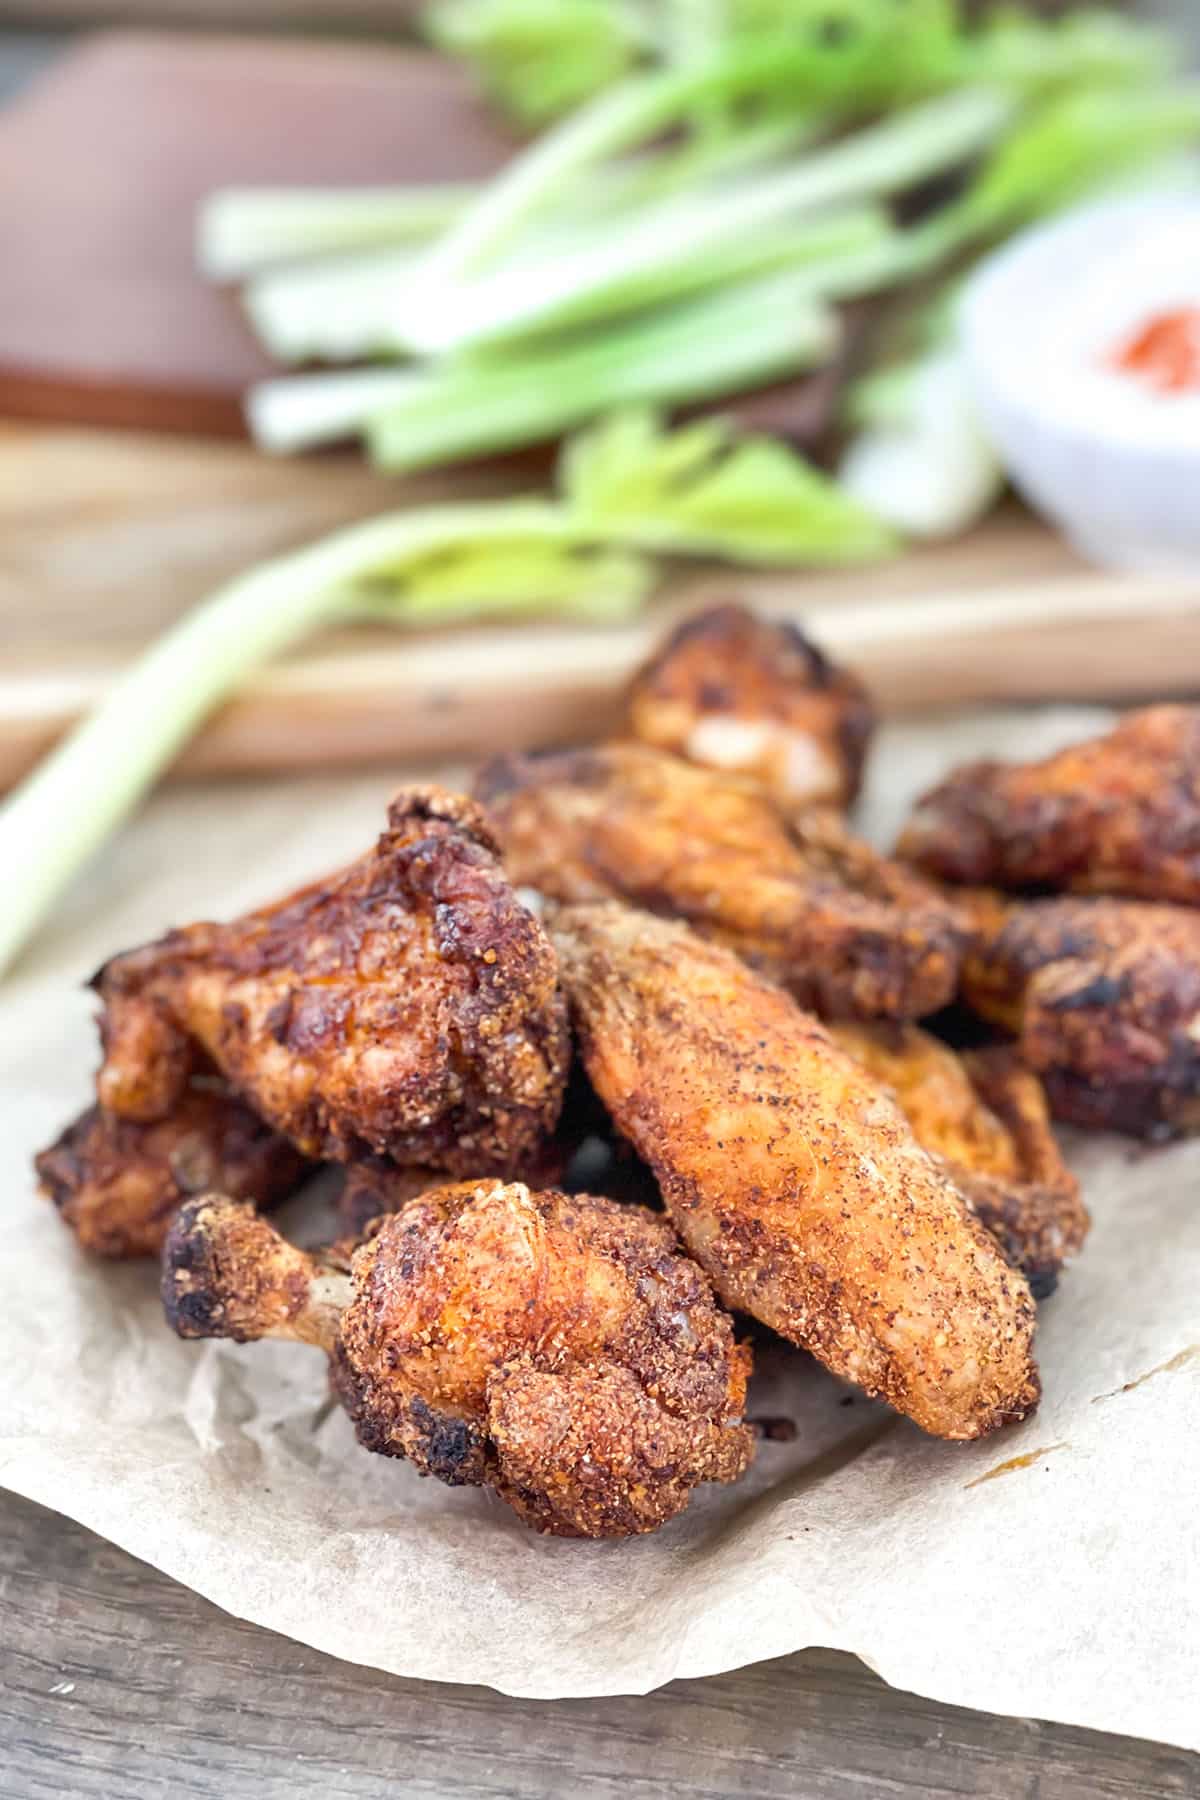 Best Dry Rub for Chicken Wings